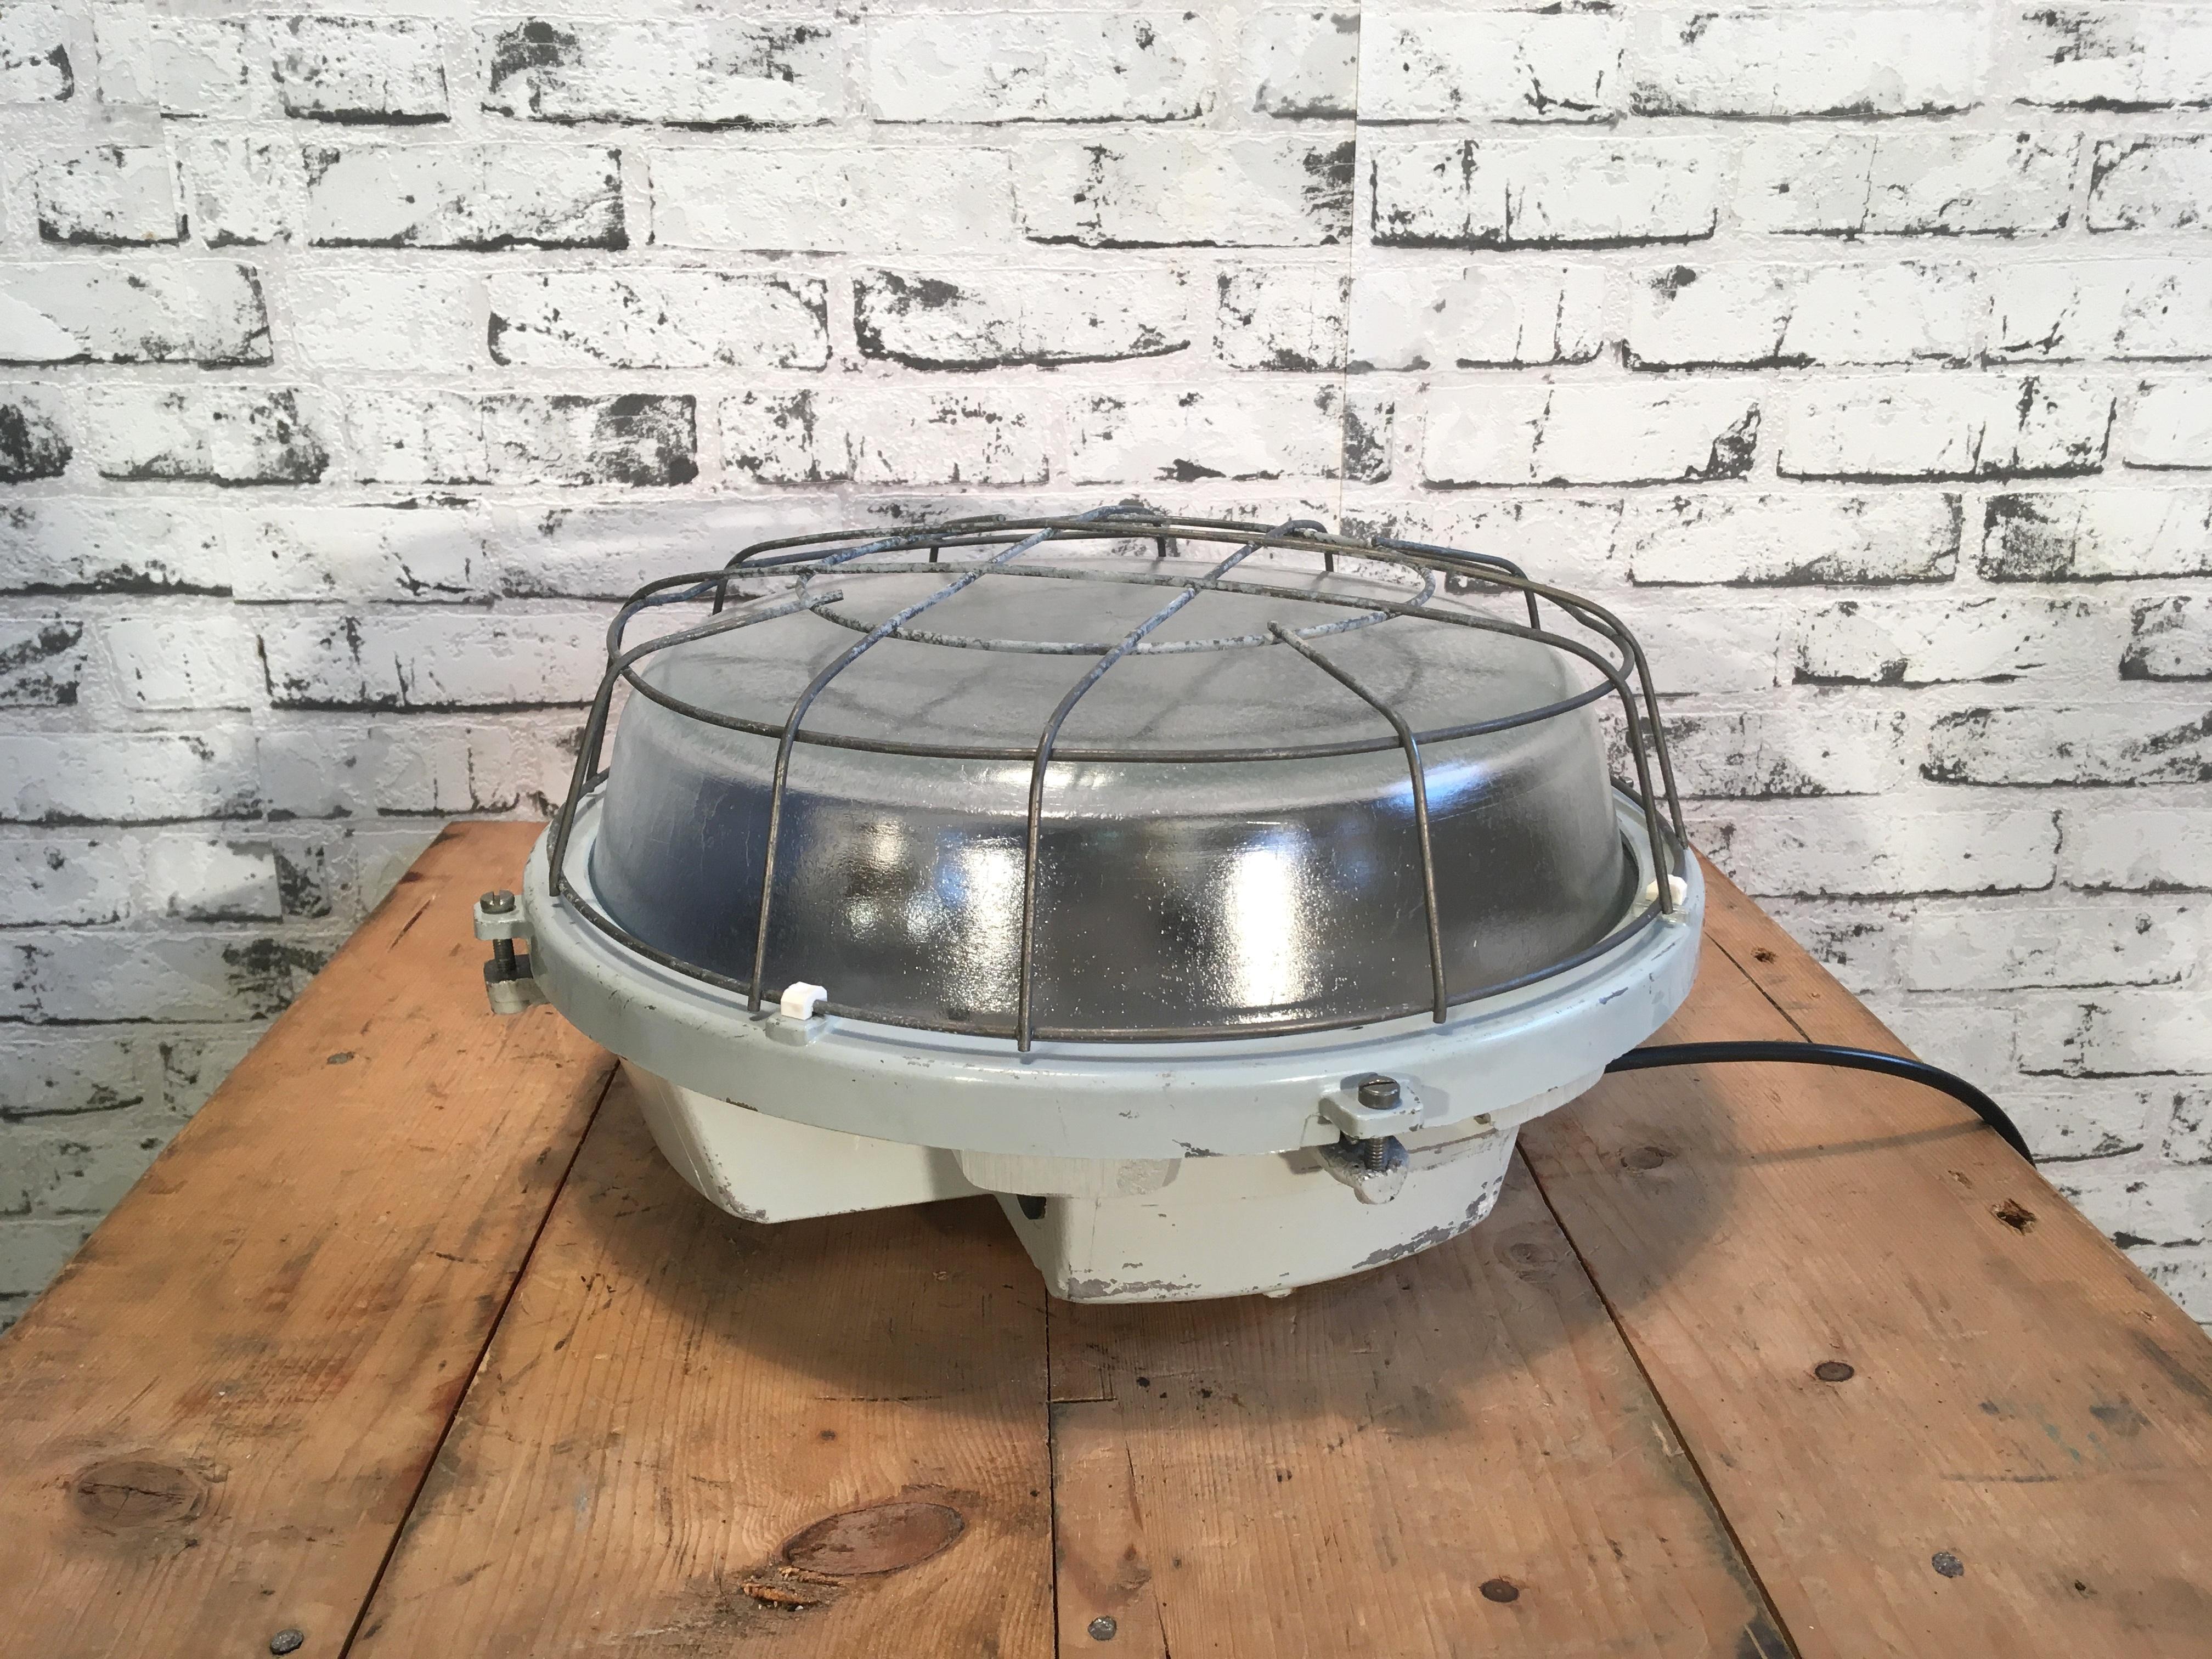 This grey cast aluminium wall lamp was made by Elektrosvit in former Czechoslovakia during the 1980s. It has two new porcelain E27 sockets, frosted curved glass cover and steel grid. It can also be used as a ceiling lamp. Weight of the lamp is 6.5